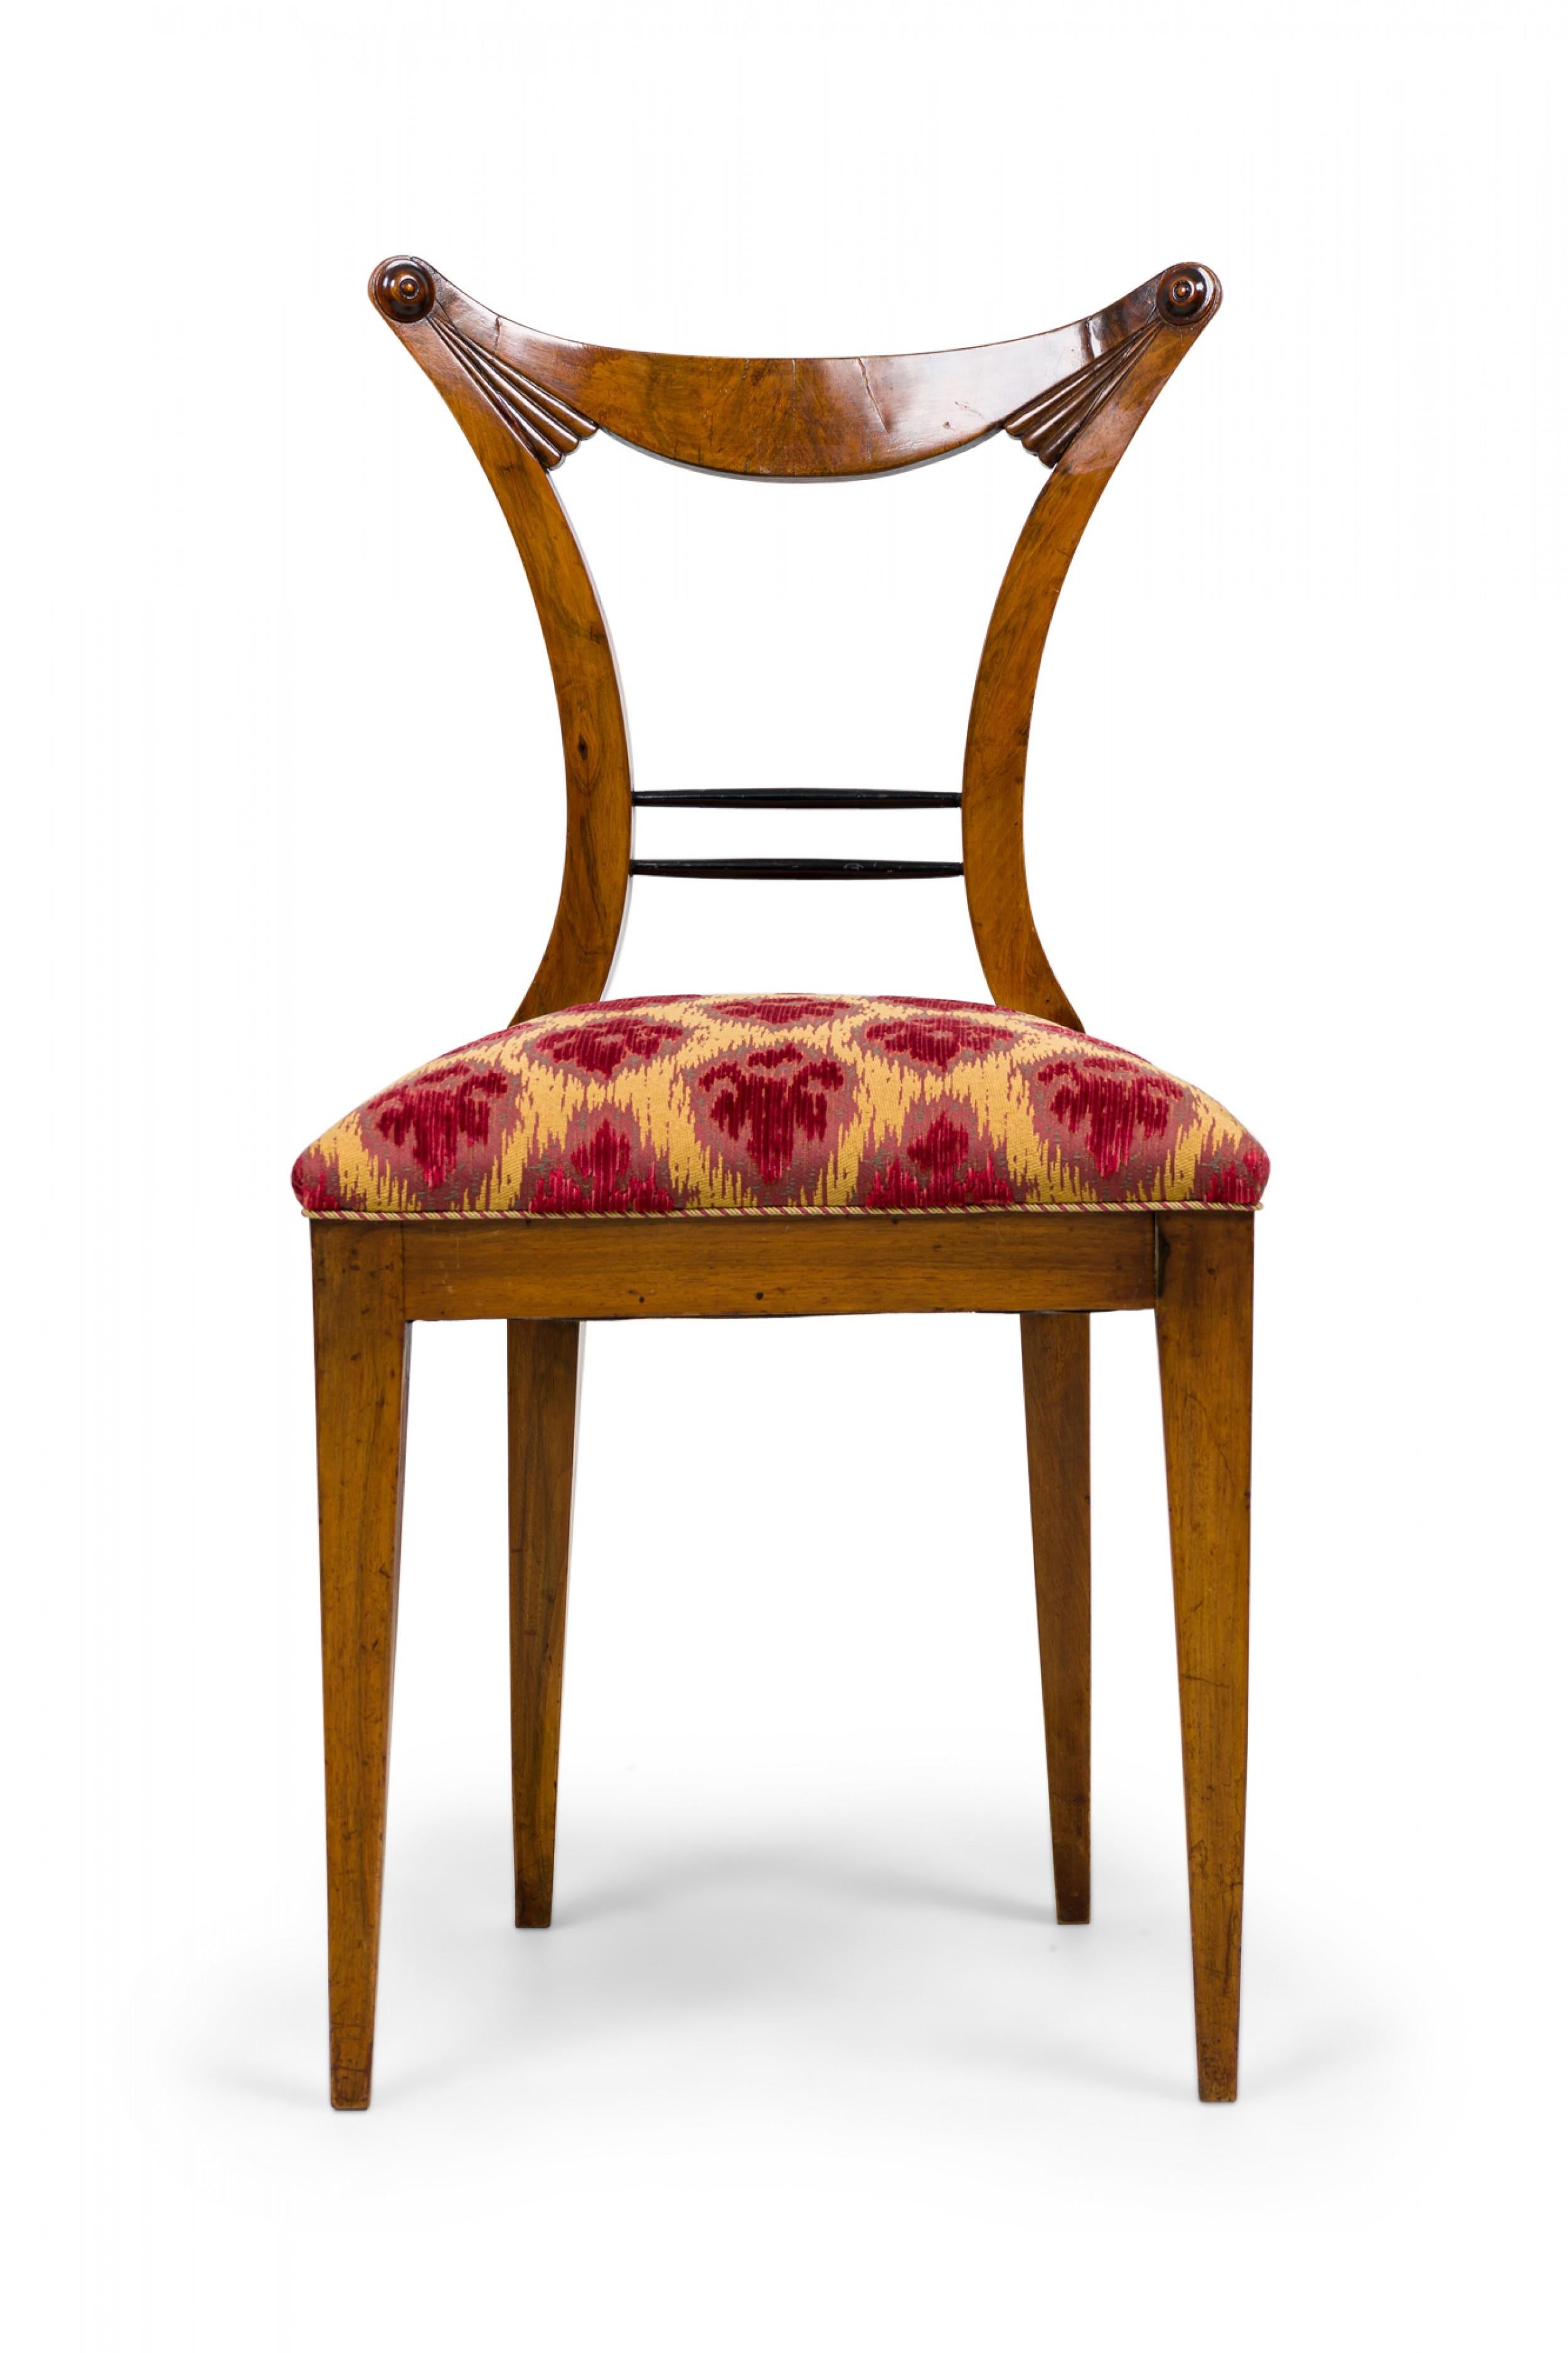 SET of 6 Biedermeier Viennese (19th Century) dining chairs with a concave styled openwork backrest & carved embellishments, 2 turned horizontal supports, the seat cushion upholstered in an abstract red & yellow patterned fabric bordered by striped